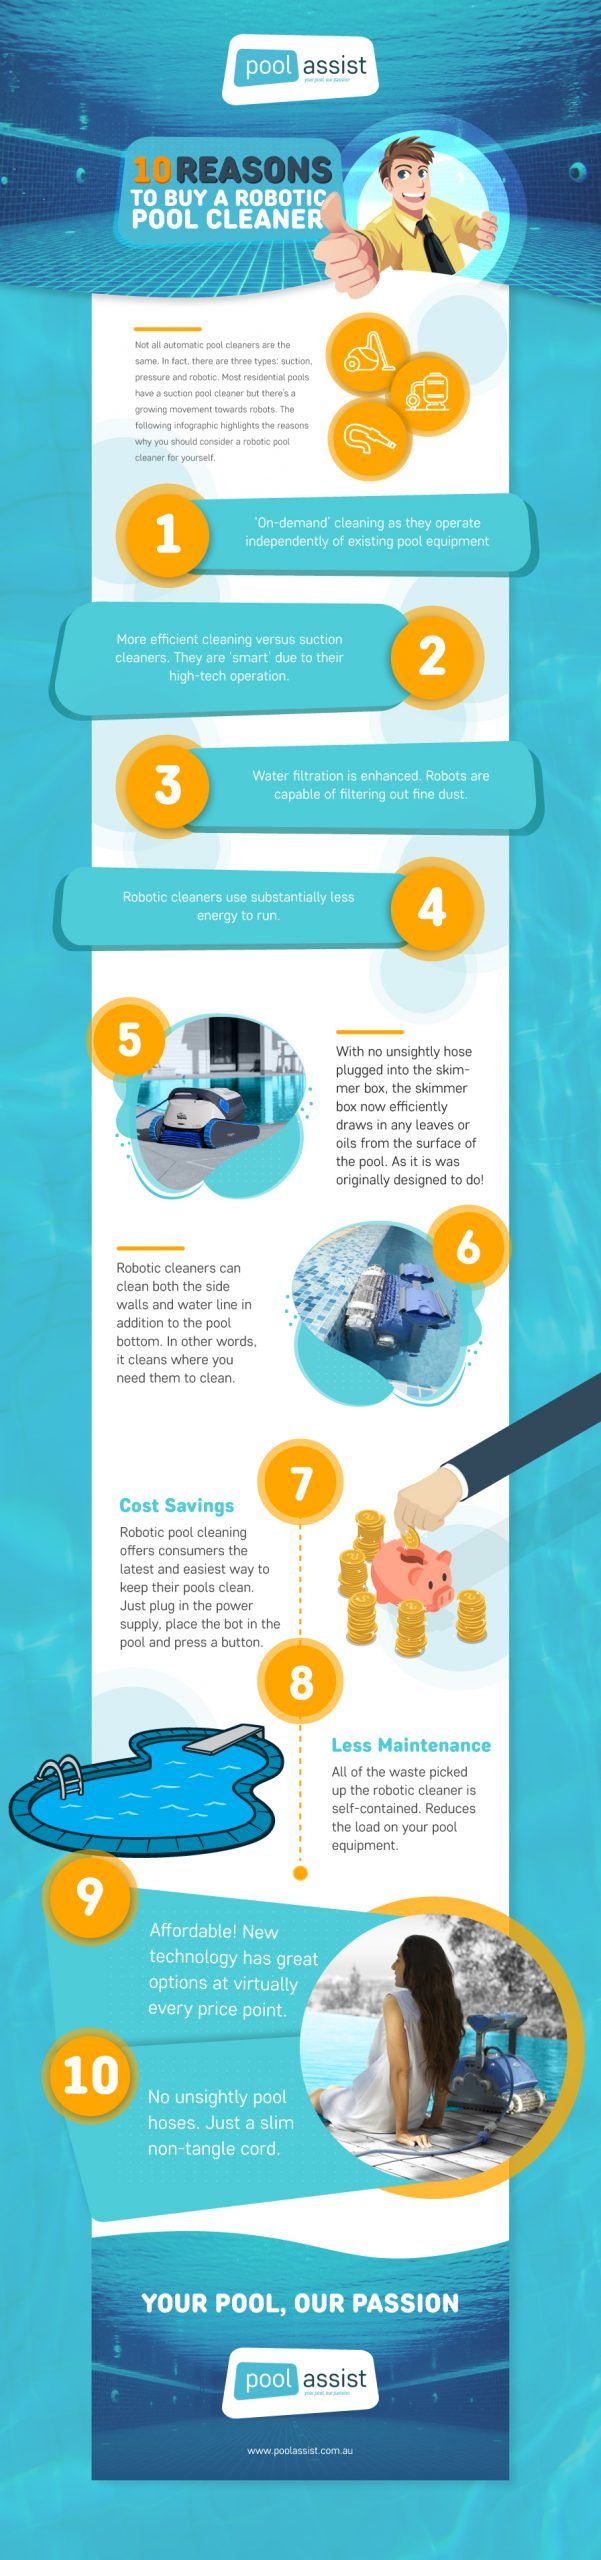 10 Reasons to Buy a Robotic Pool Cleaner